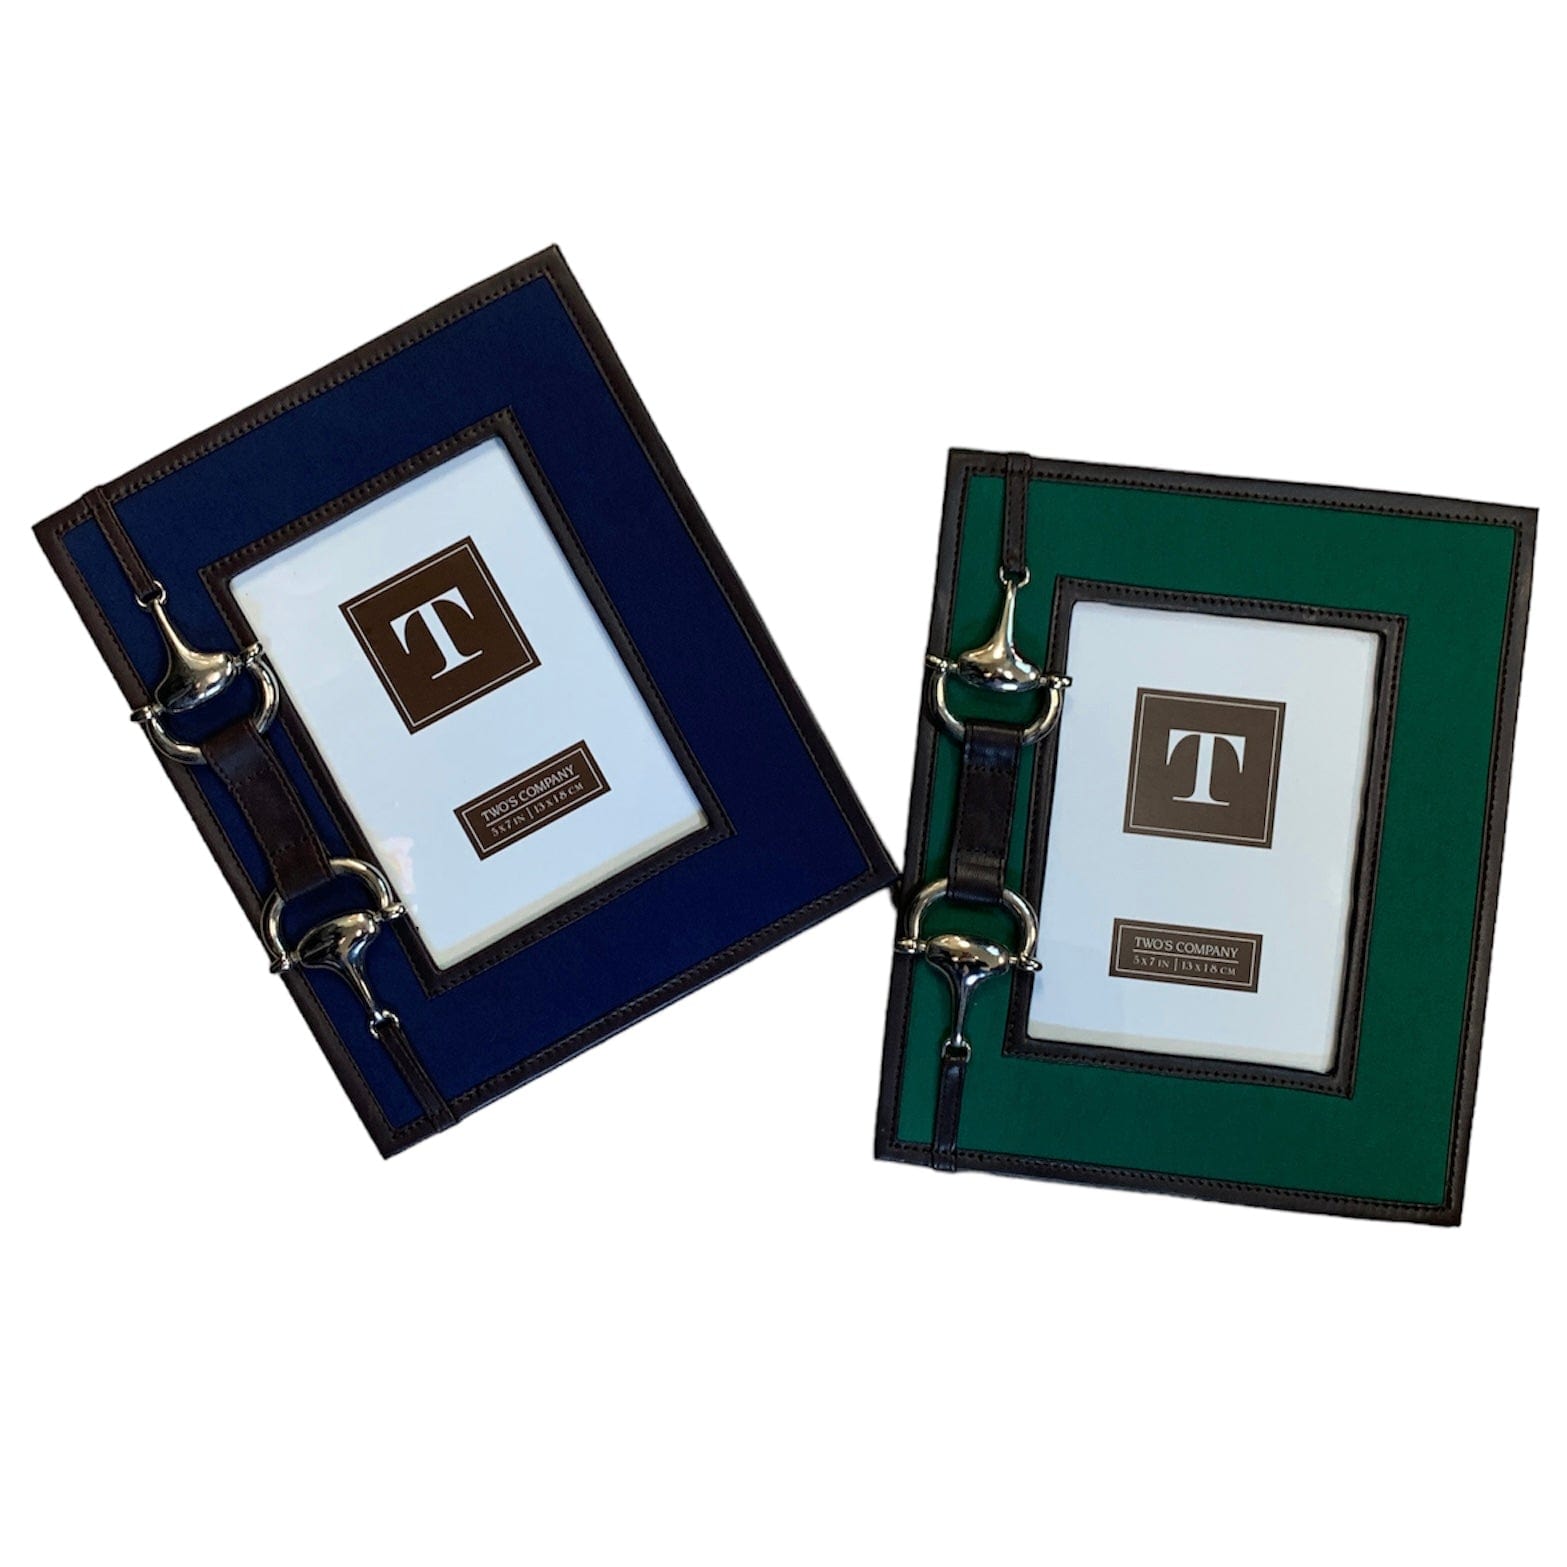 On the left is a blue picture frame with brown leather border, decorated with a chrome snaffle bit to left of glass frame. To the right is a green picture frame with brown leather border, decorated with a chrome snaffle bit to left of glass frame.